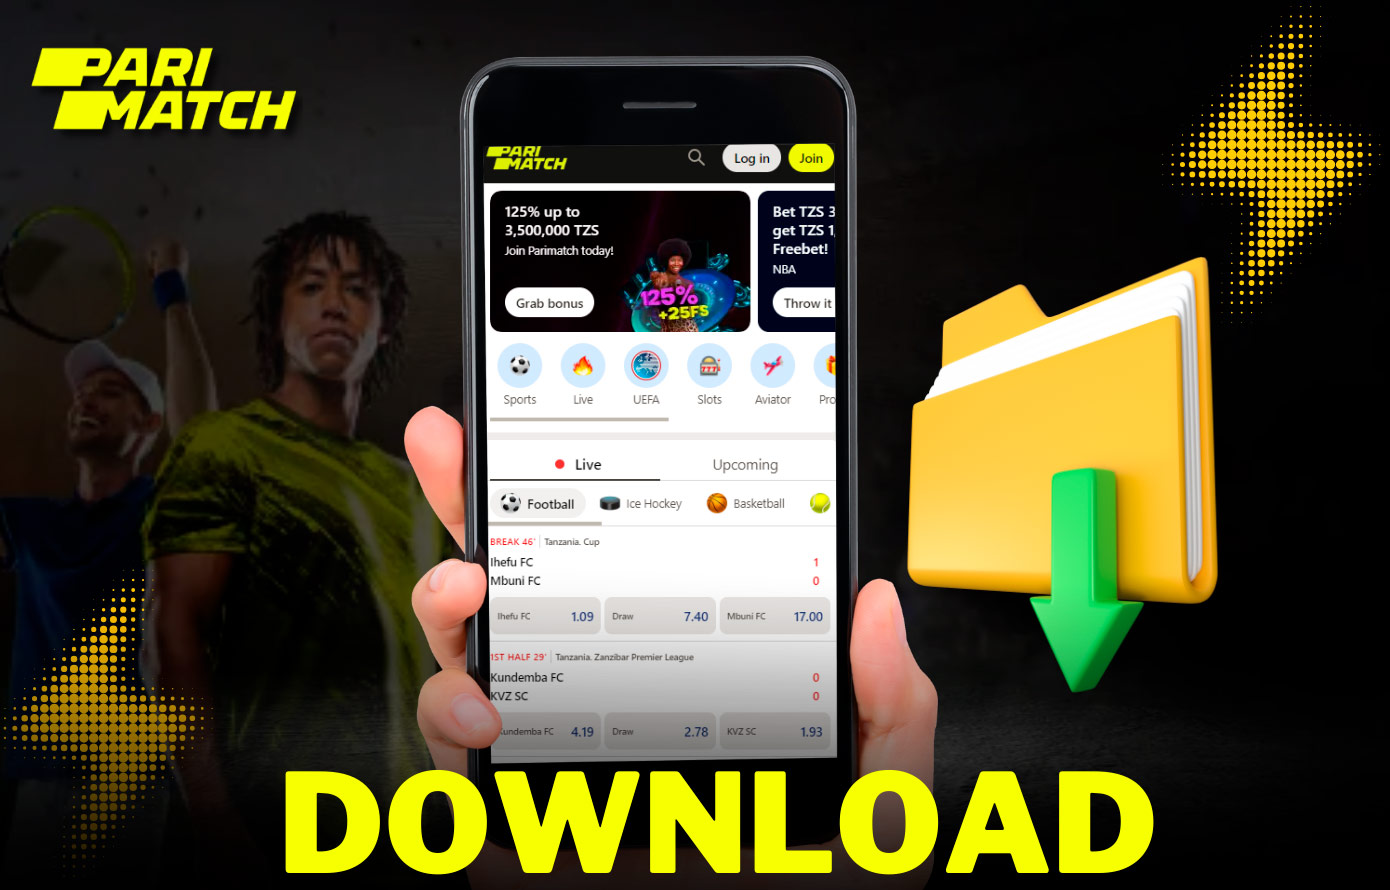 The Parimatch app is available for download